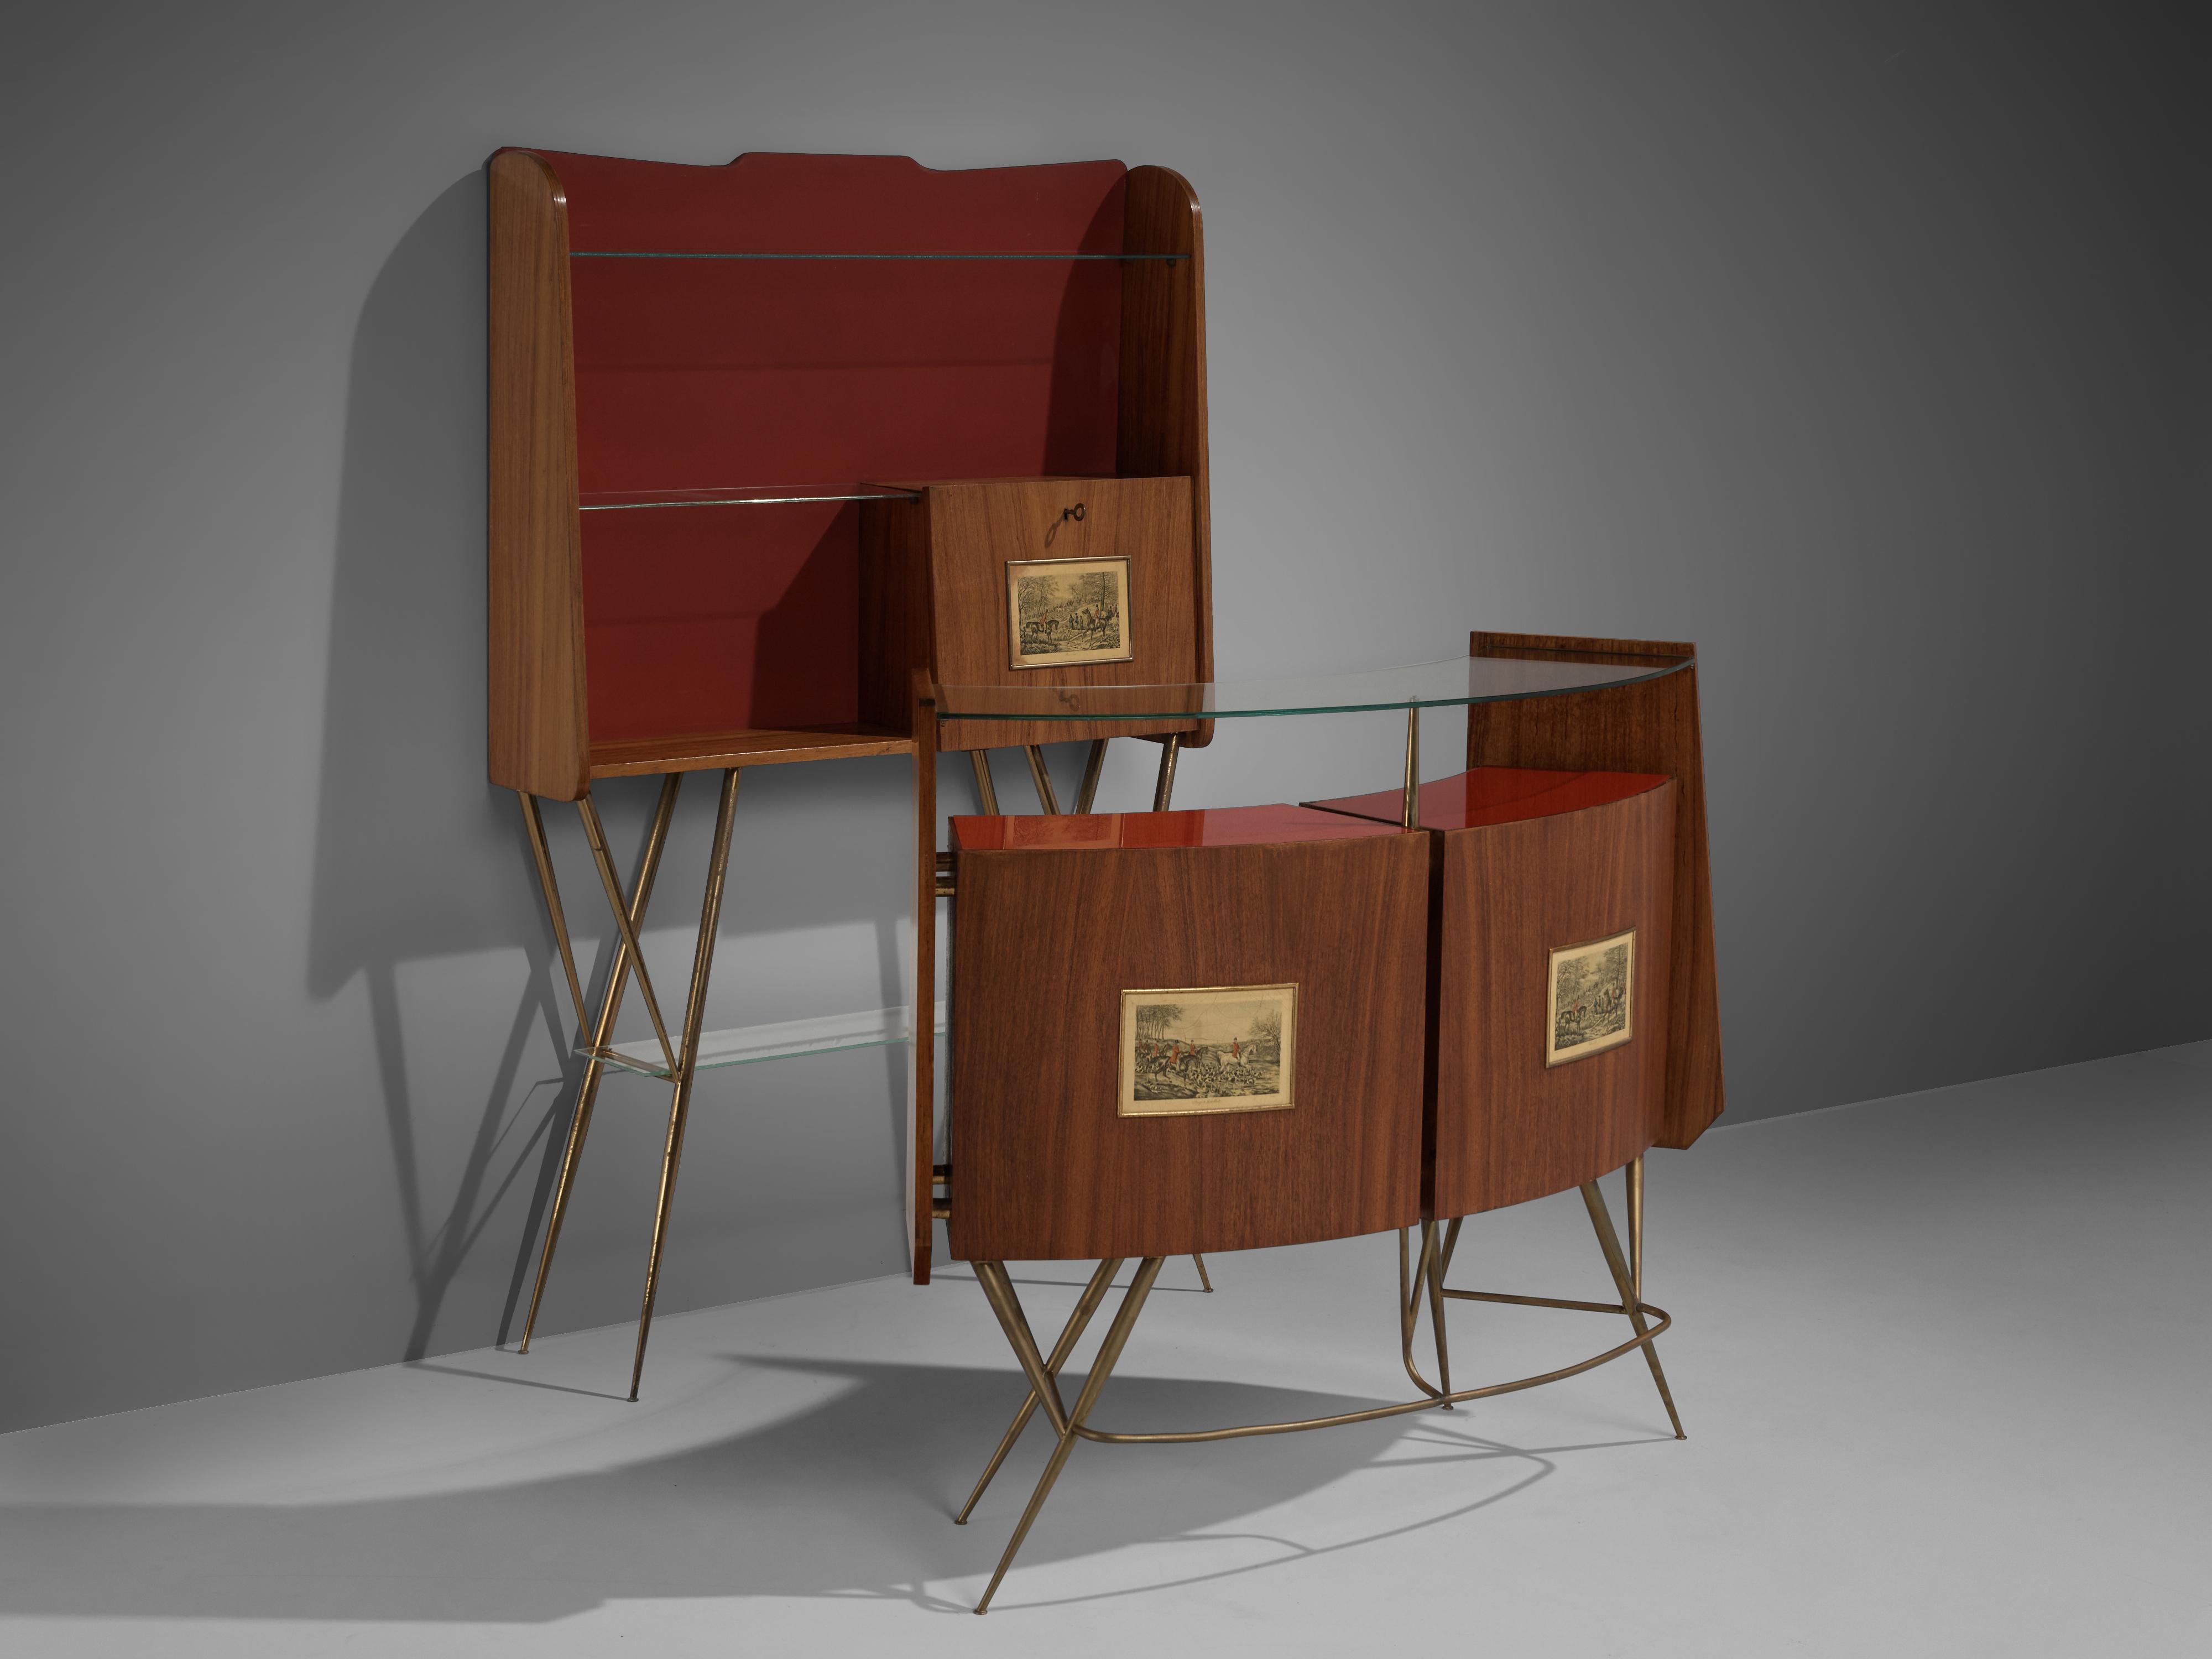 Dry bar with additional cabinet, rosewood, glass, metal, Italy, 1950s
 
This set of free-standing dry bar and high-legged cabinet is a wonderful example of Italian midcentury design. The way both items are lifted up by tapered legs in brass could